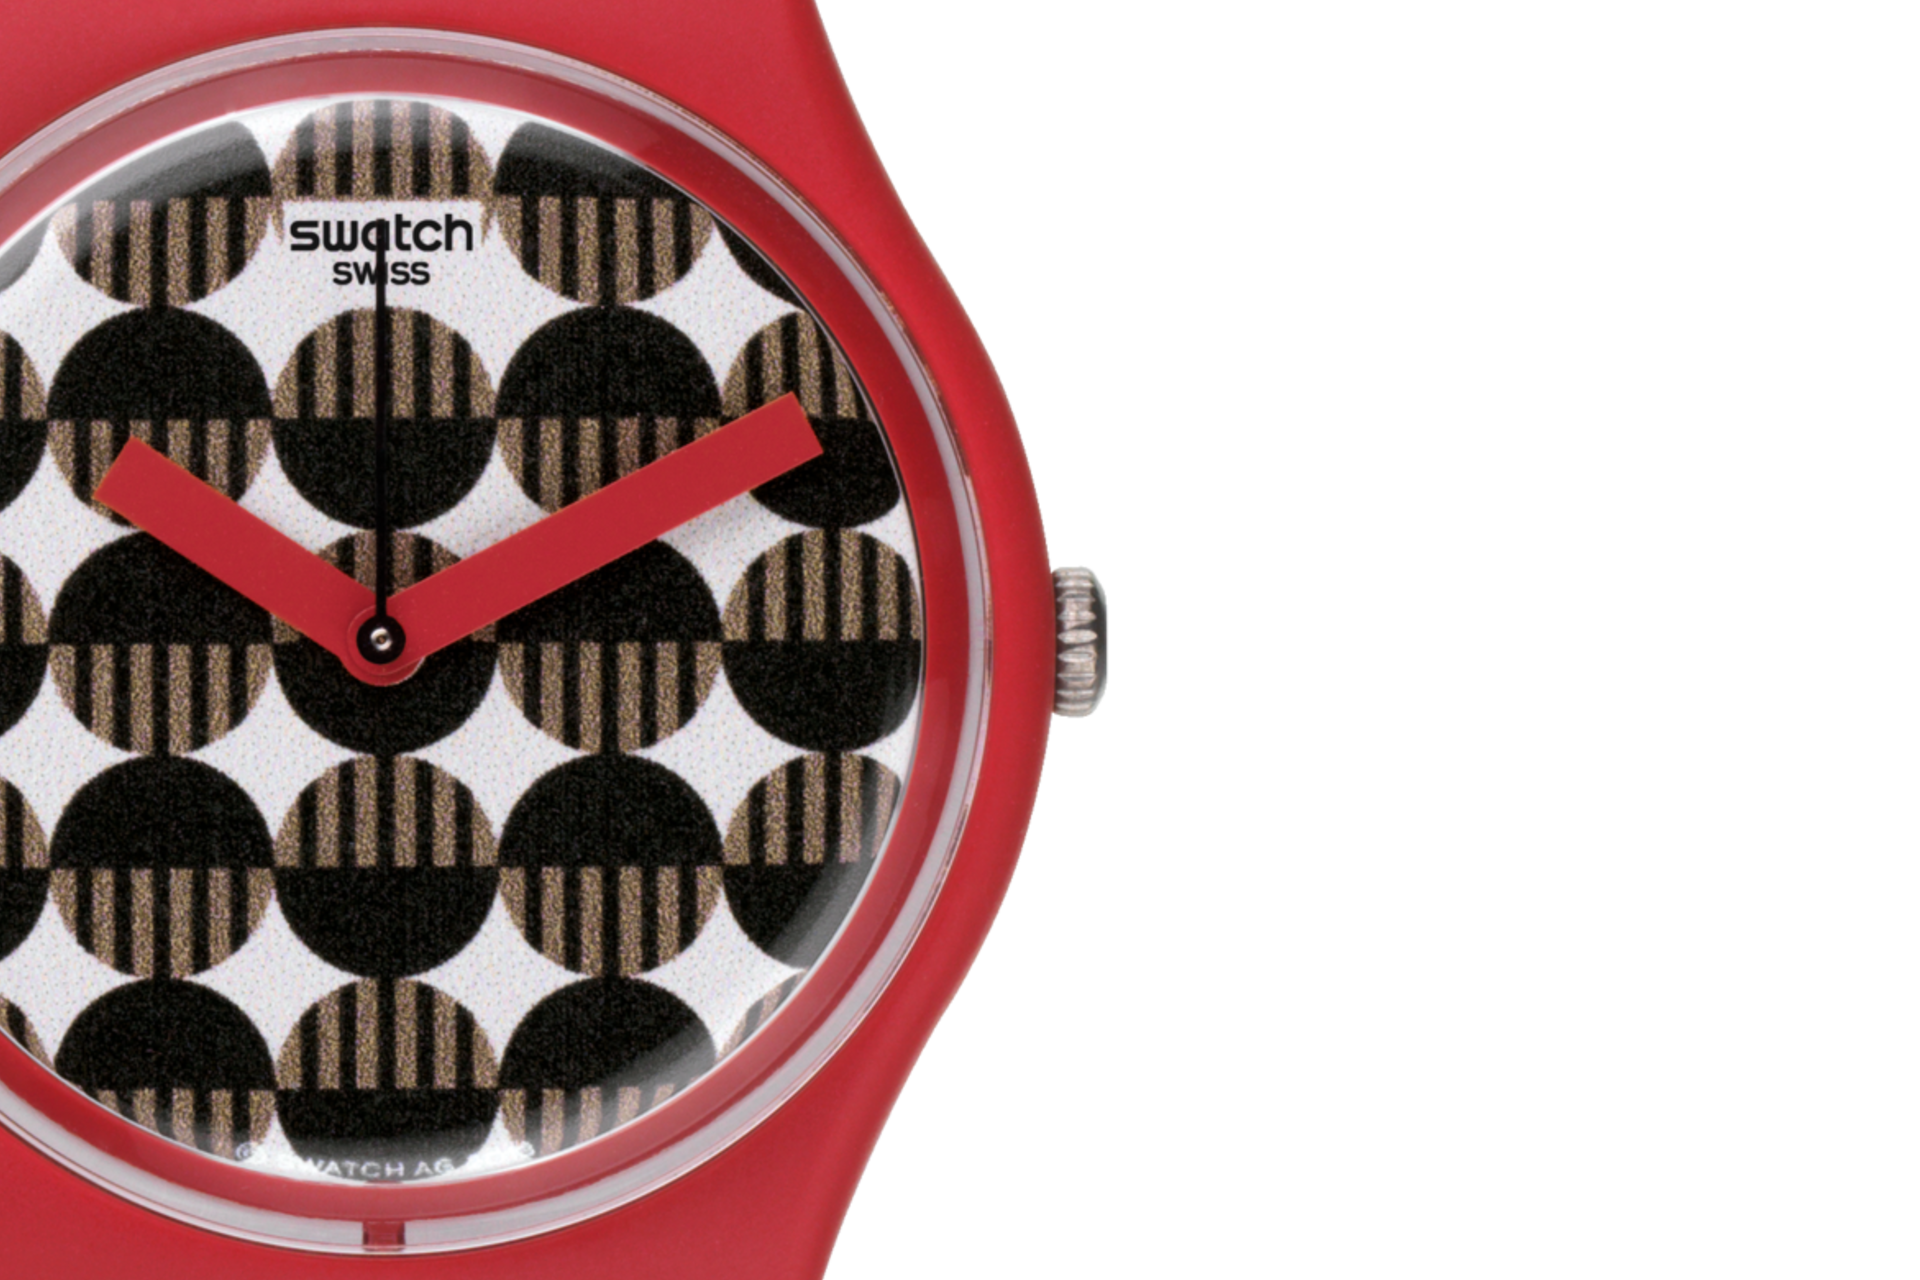 Swatch Goes Vintage with the 1984 Reloaded Collection